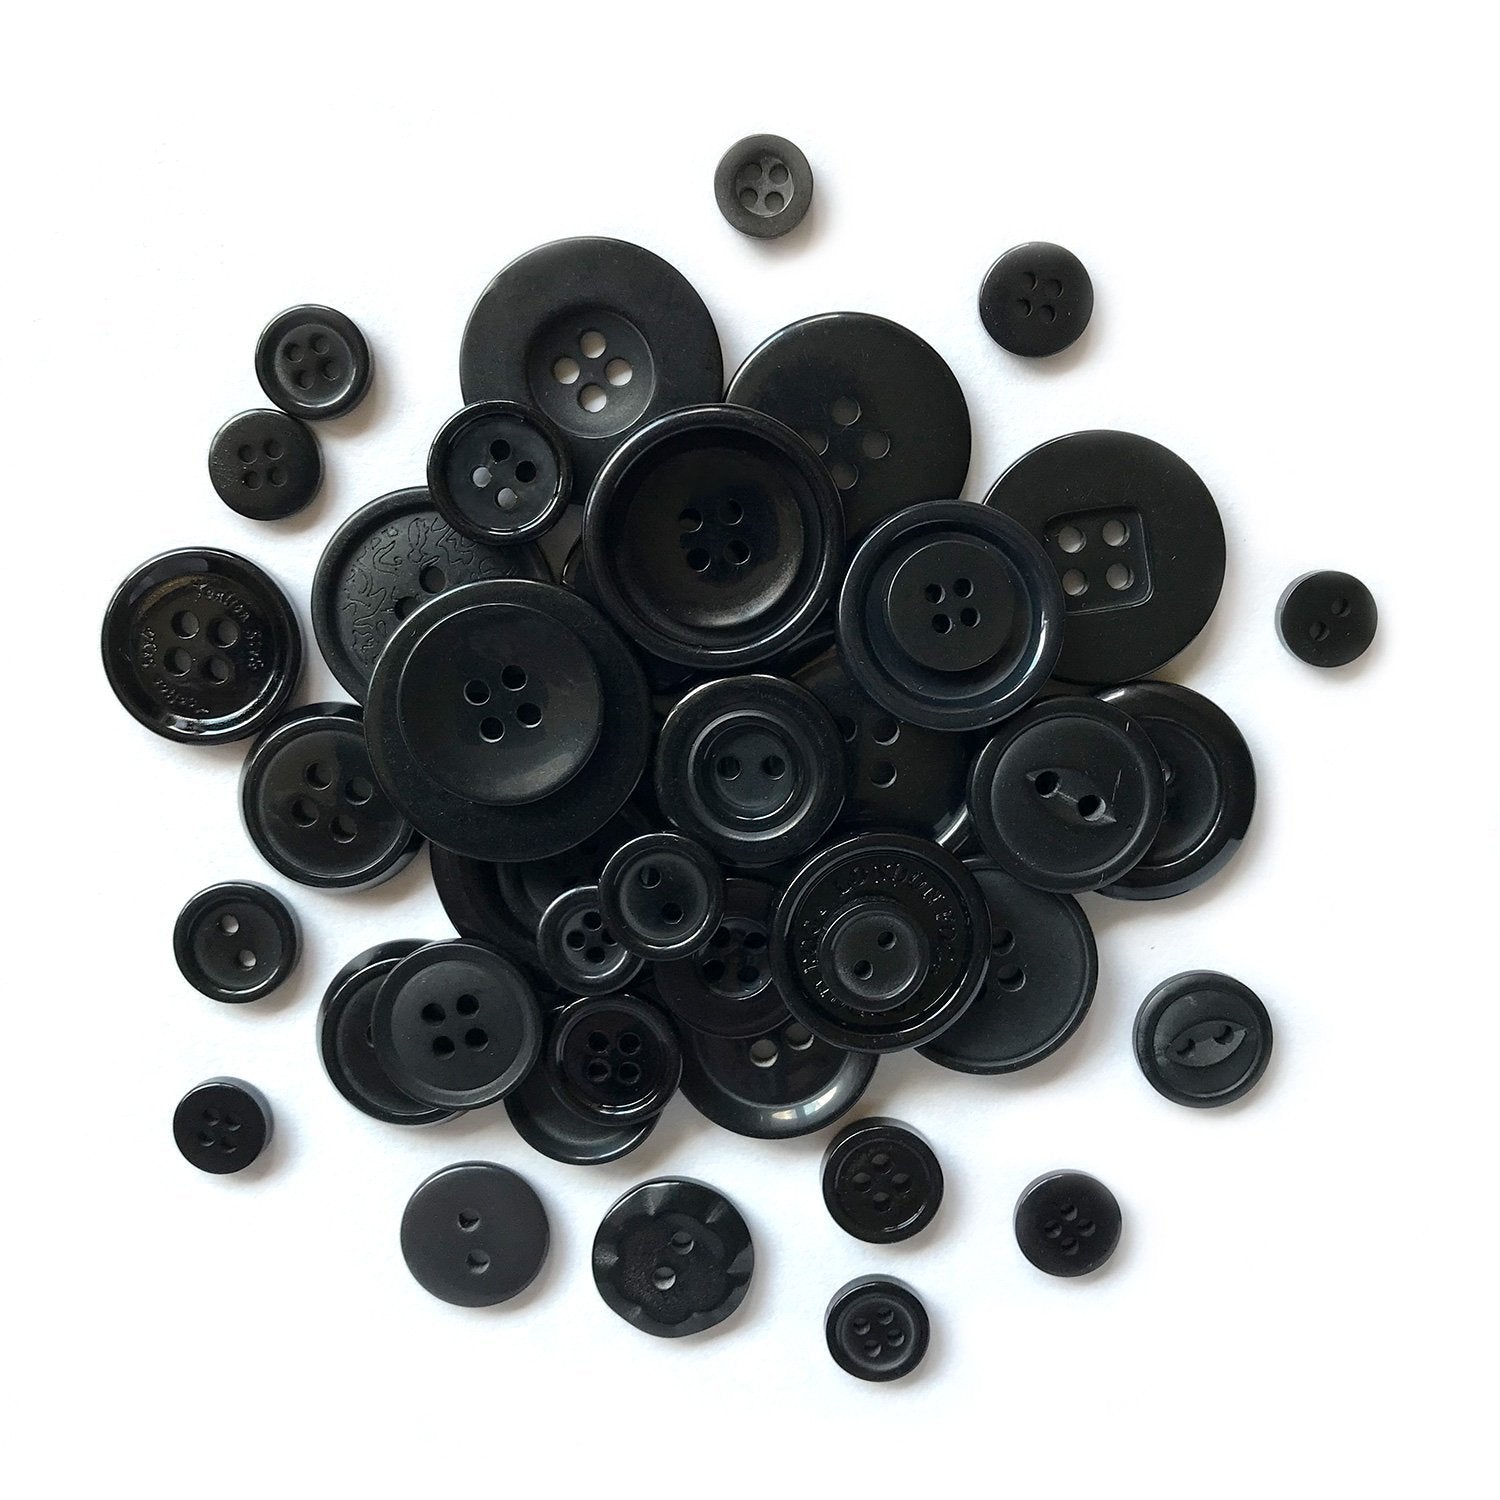 YaHoGa 40PCS 30mm Black Buttons Large Resin Buttons for DIY Sewing Tailor  Crafts Coats Clothes (30MM)